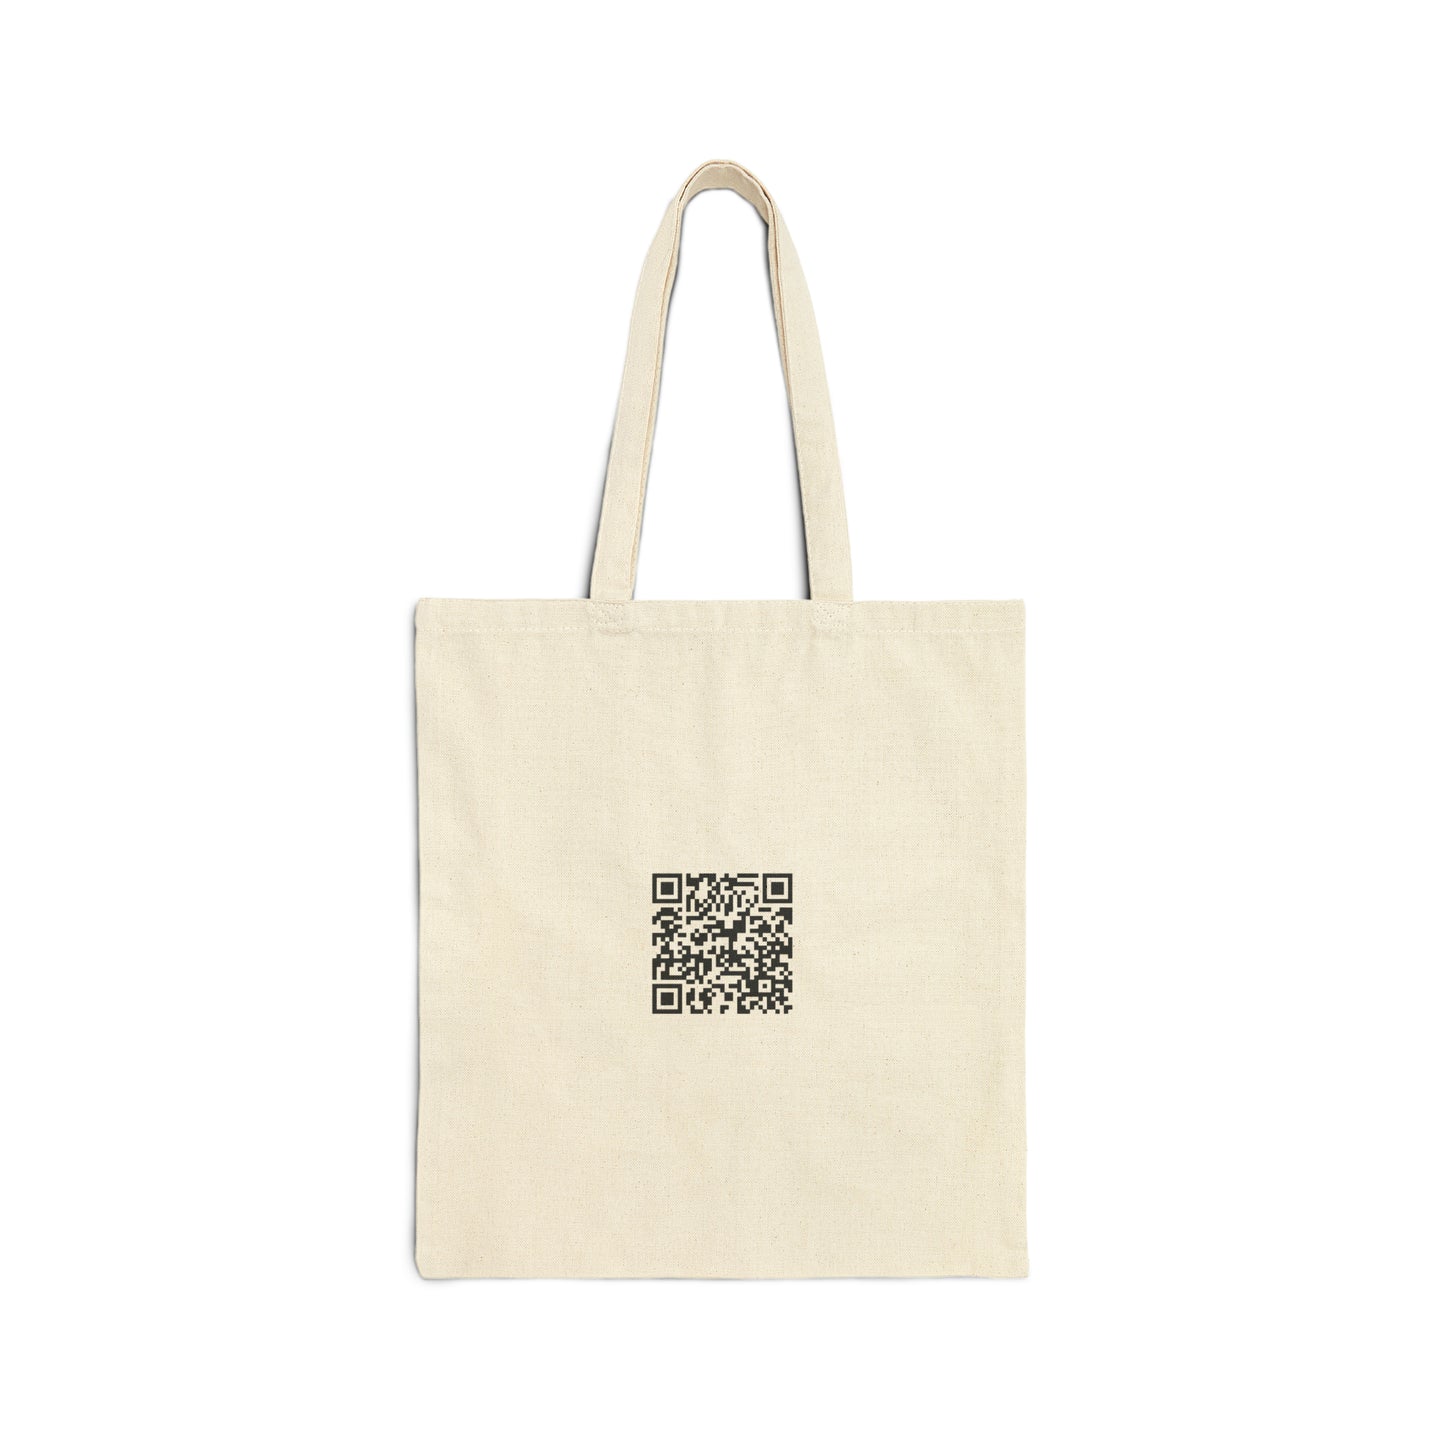 Nineteen Days - Cotton Canvas Tote Bag